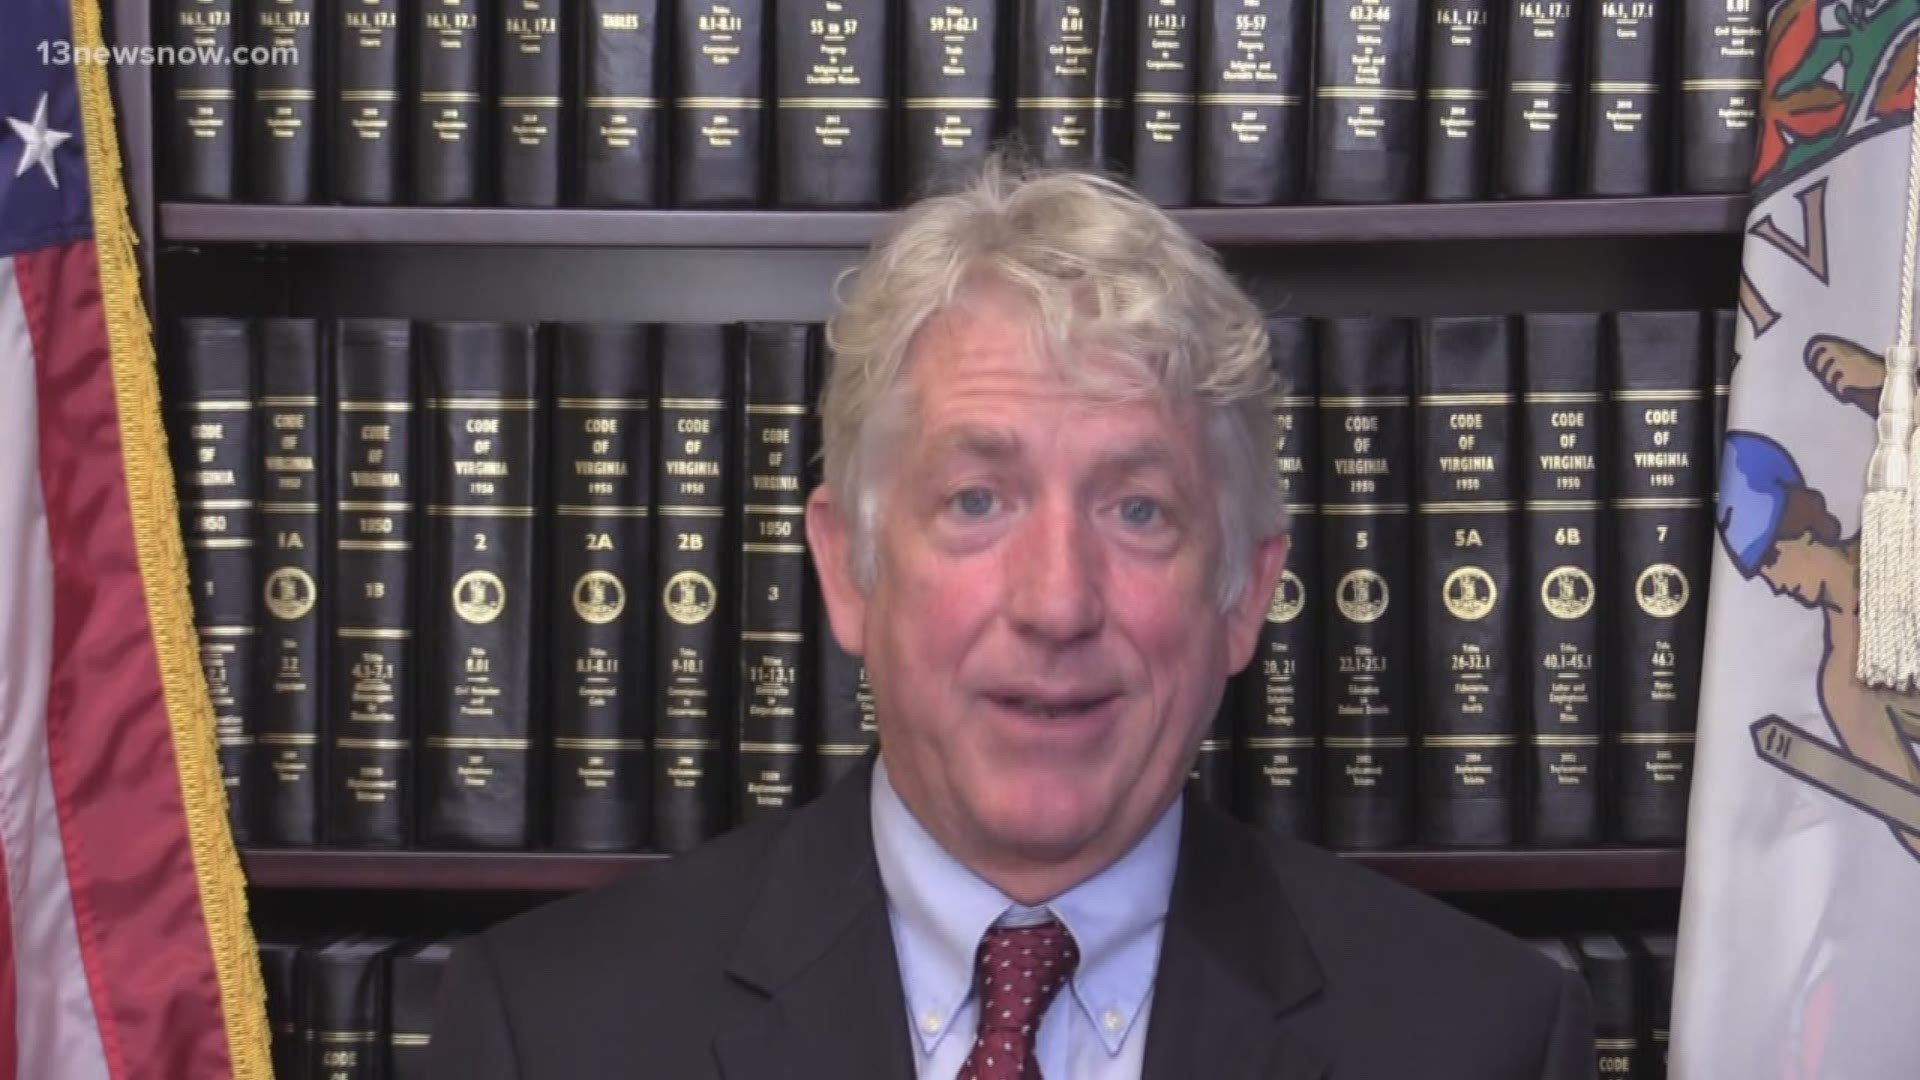 A criminal record can affect someone's ability to get a job, a place to live or education opportunities. Attorney General Mark Herring is pushing for a new policy.